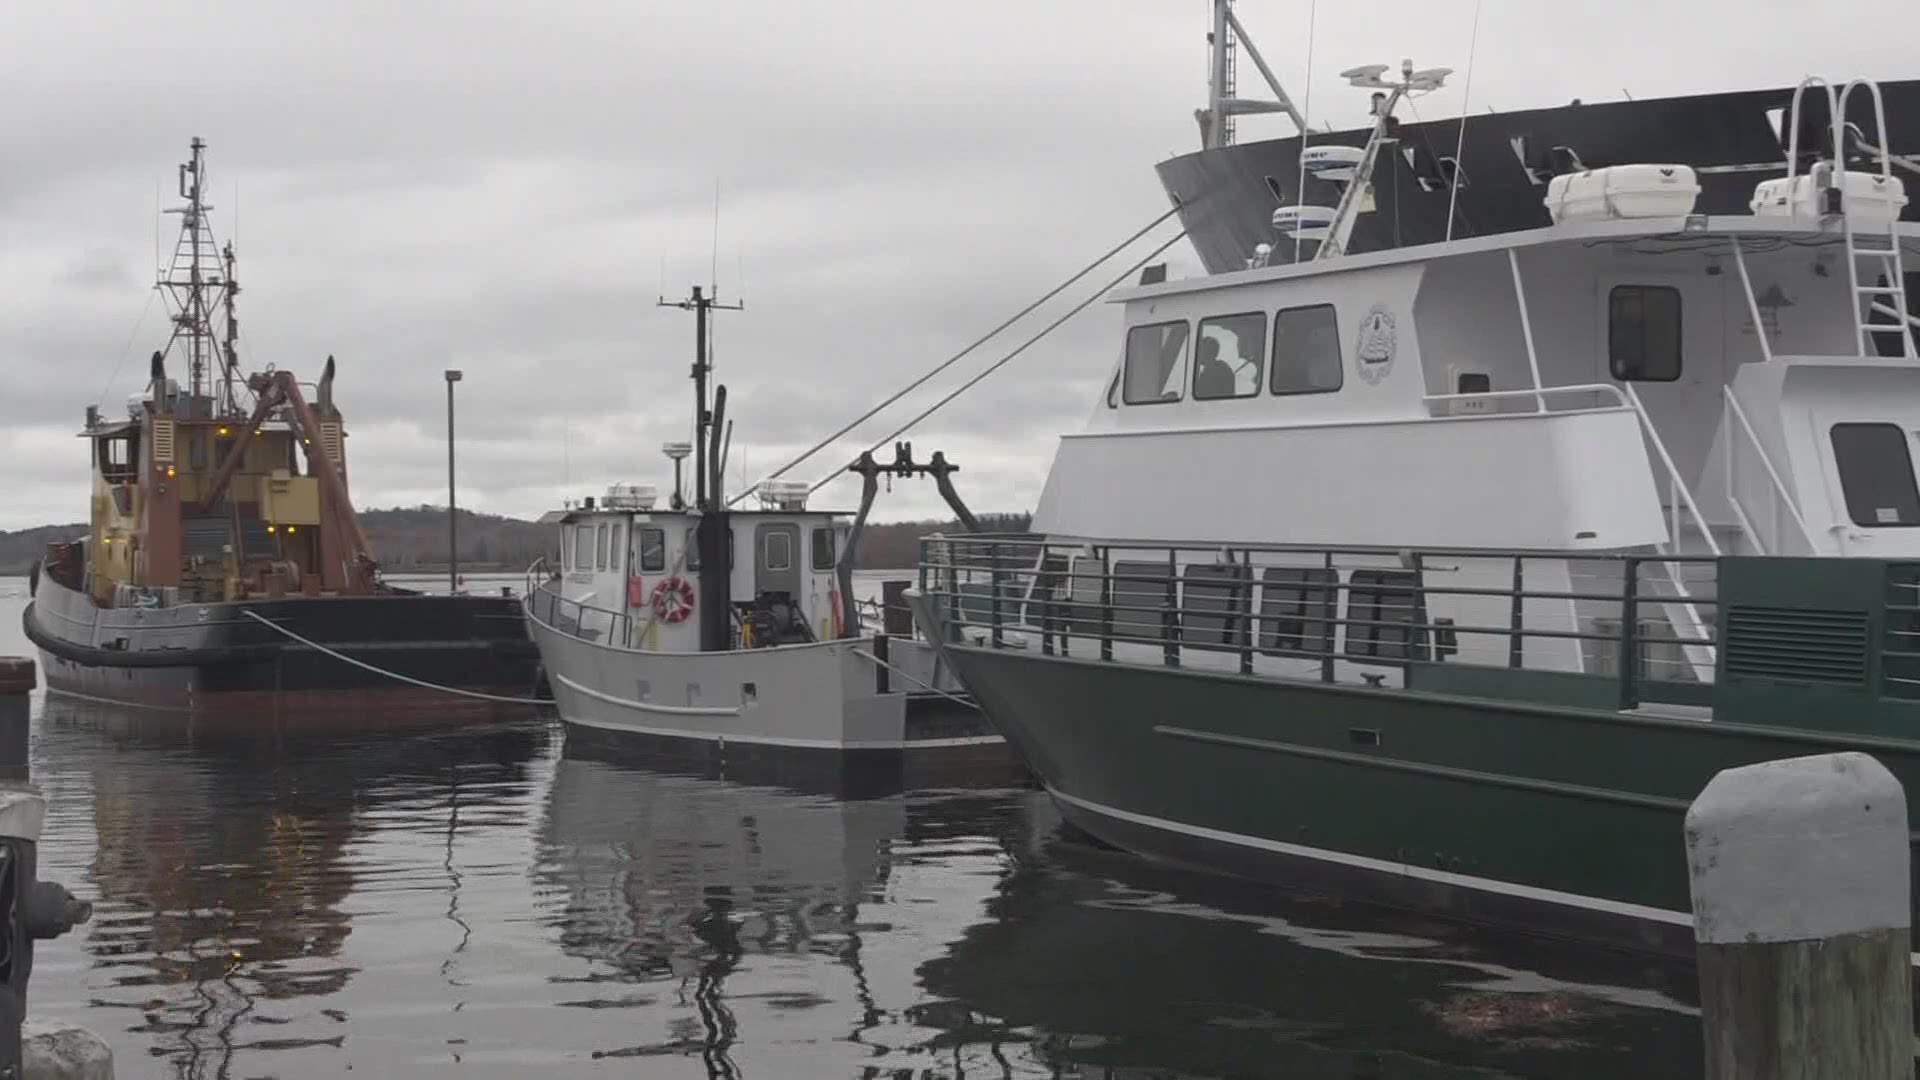 With help, Maine Maritime Academy students are able to complete training evaluations